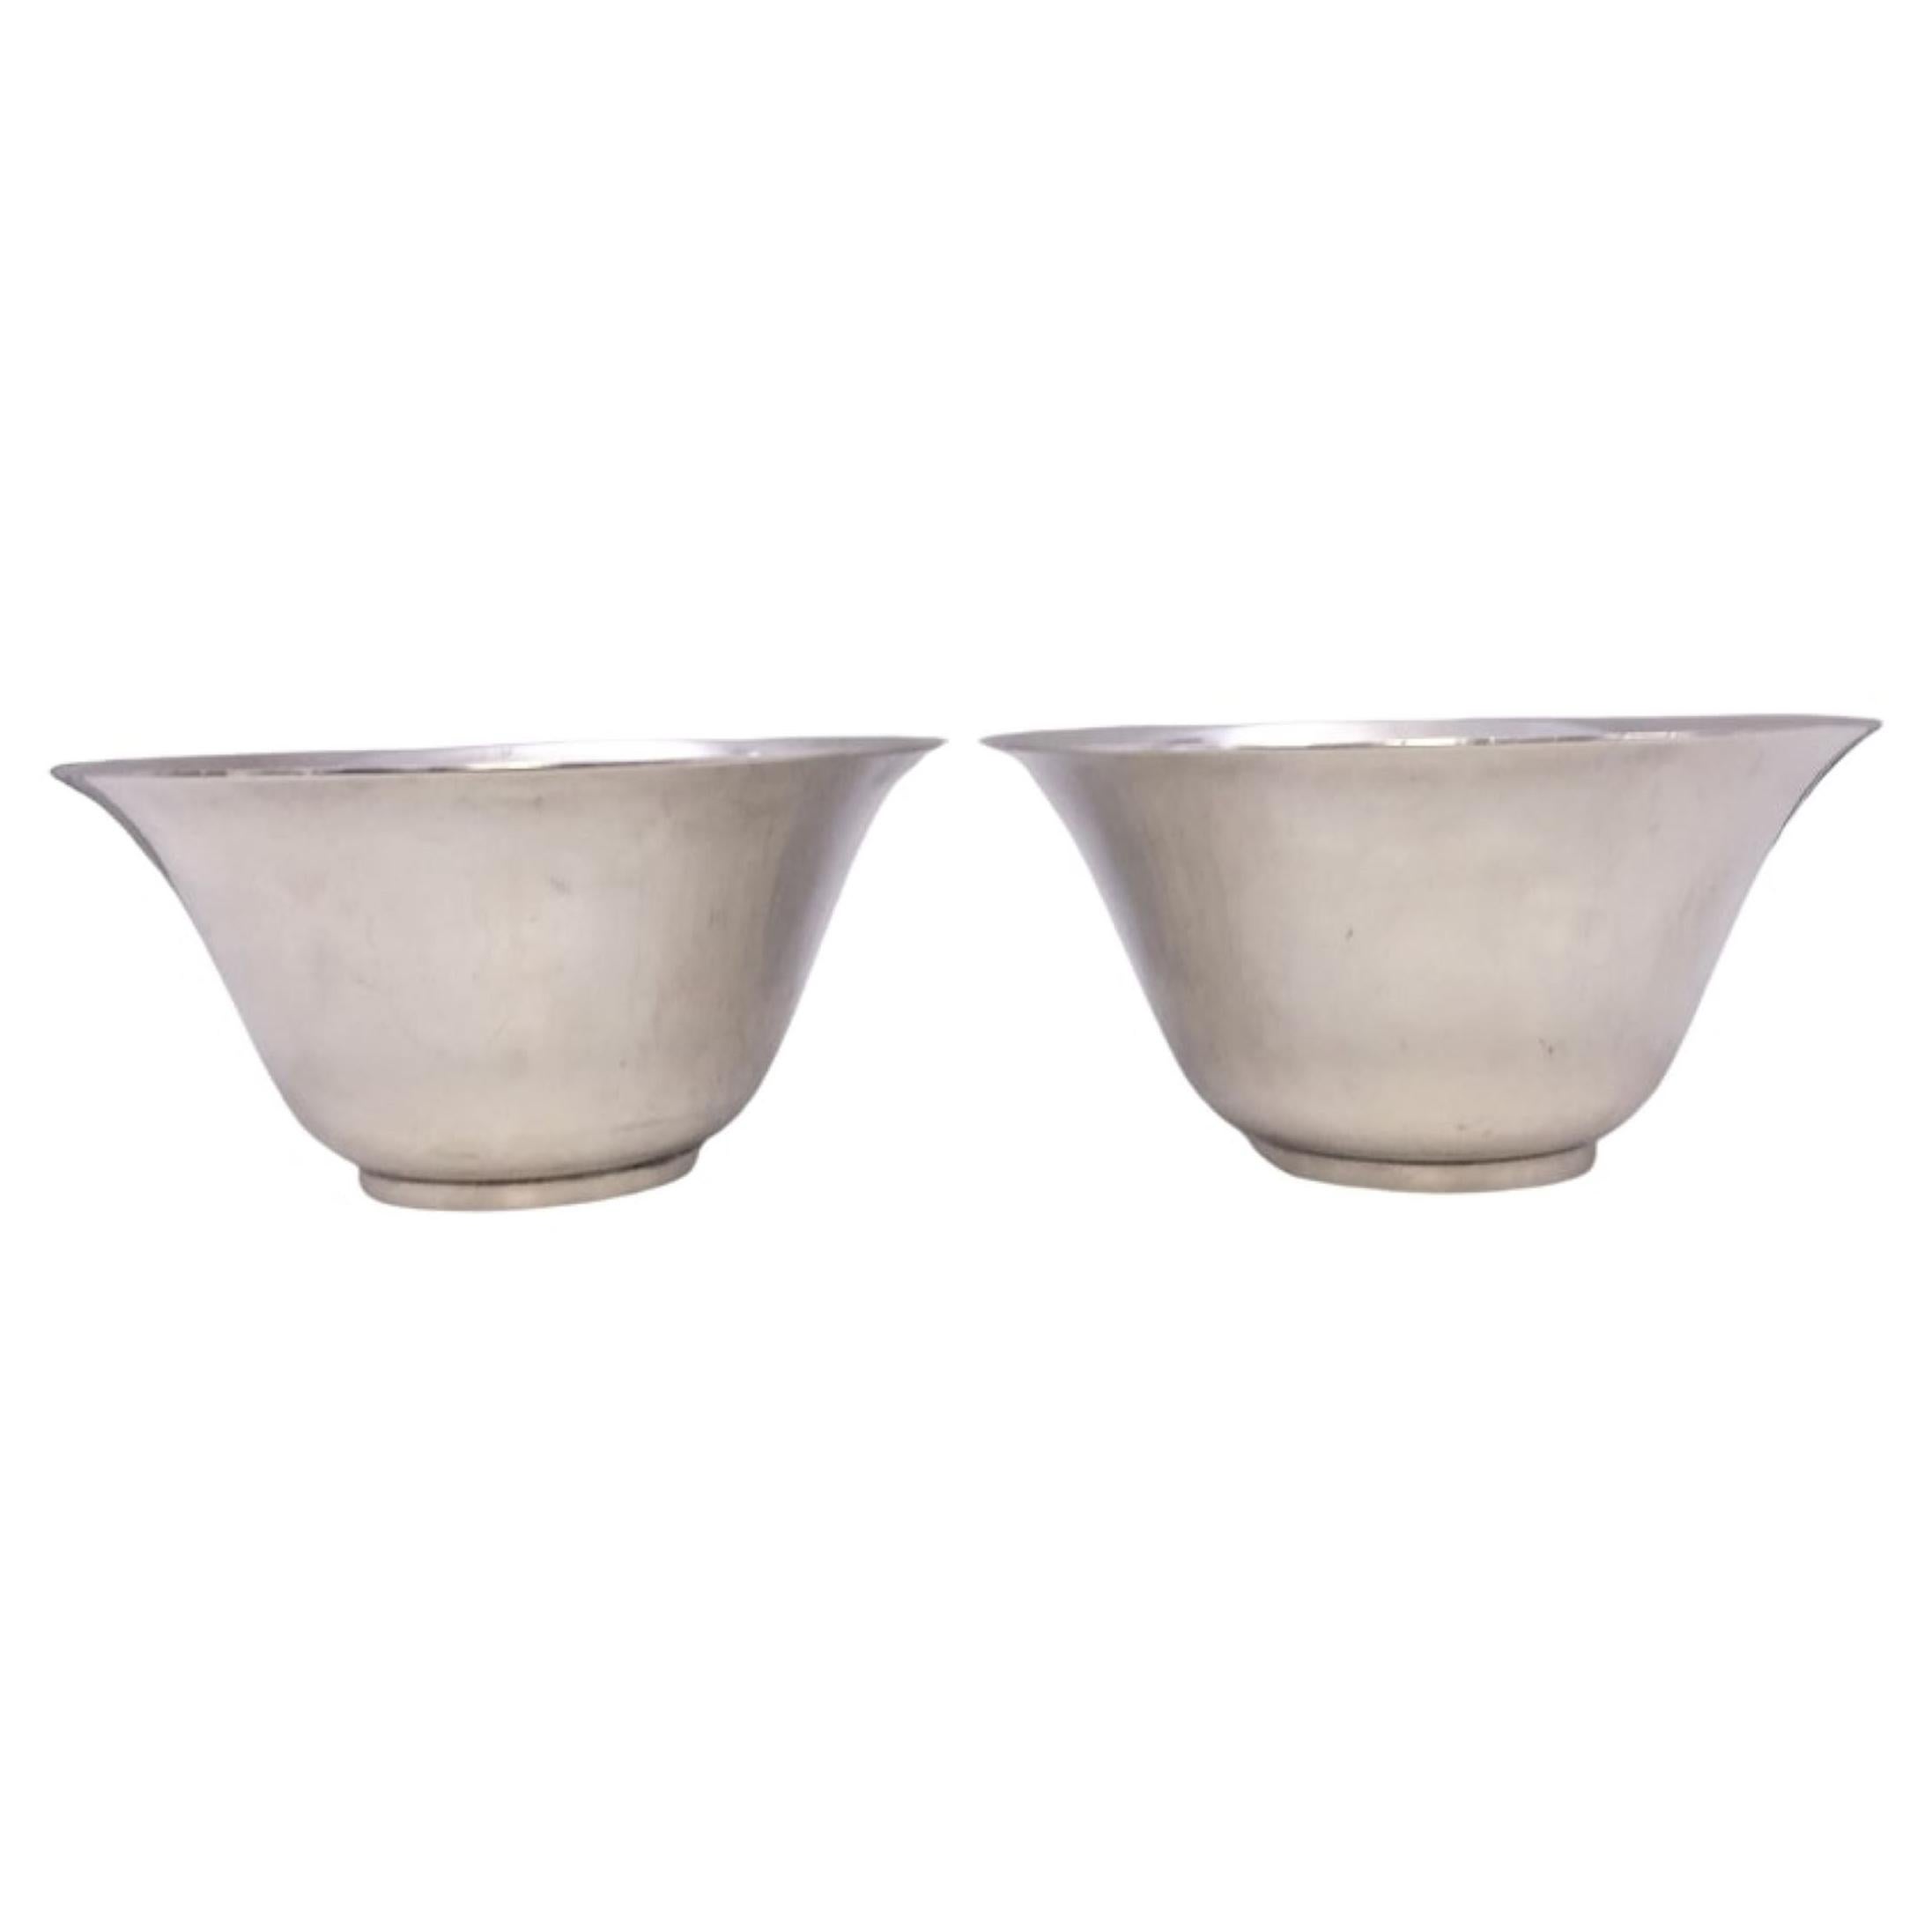 Pair of Tiffany & Co Sterling Silver Modern Bowls in Bell Form from 1906 For Sale